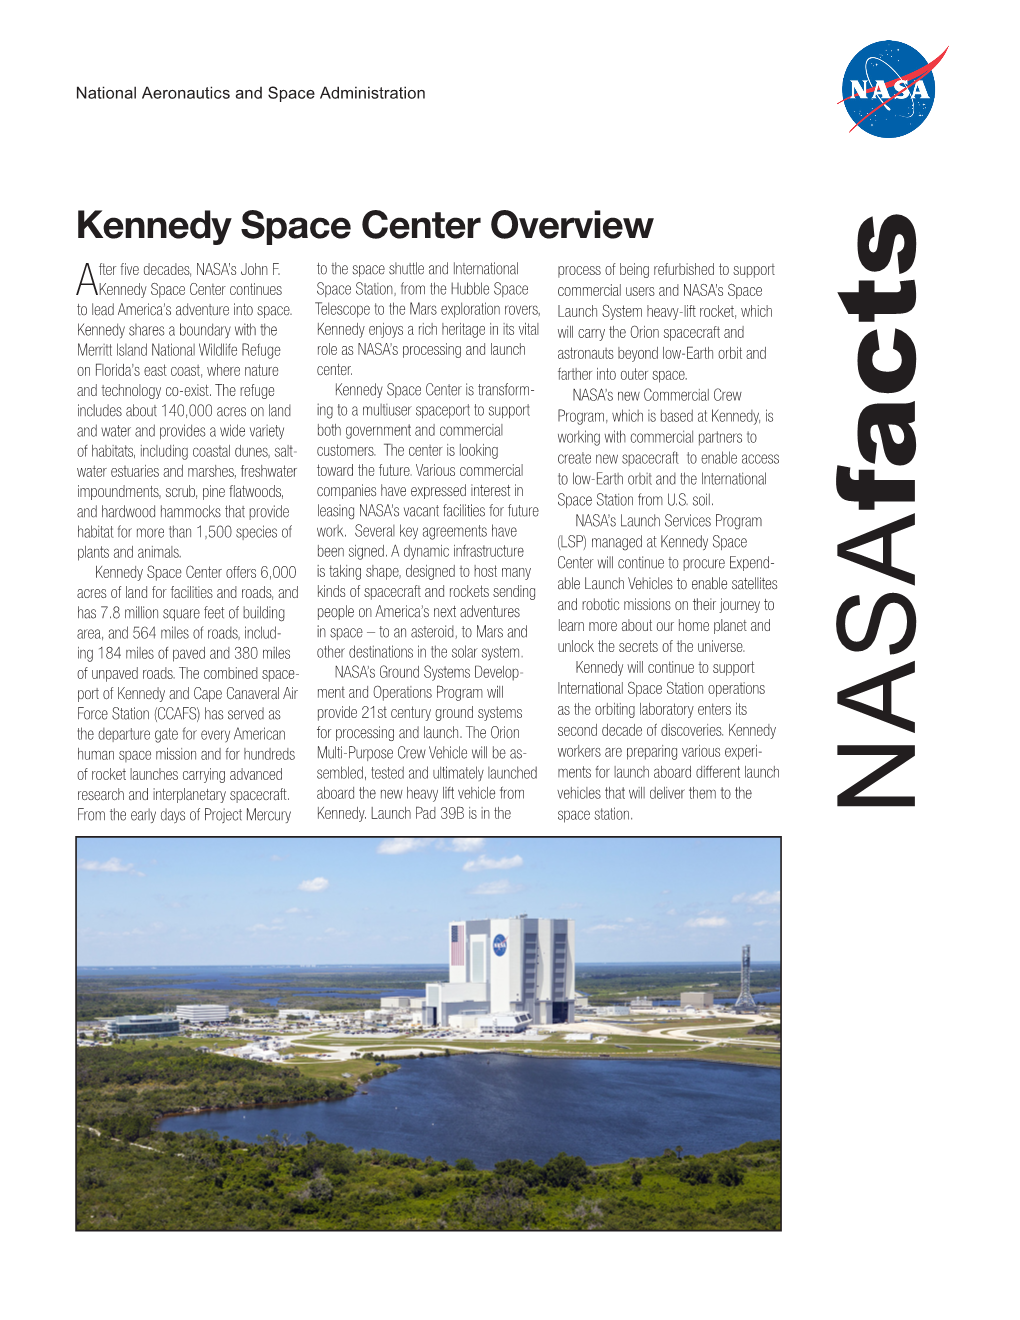 Kennedy Space Center Overview Fter Five Decades, NASA’S John F